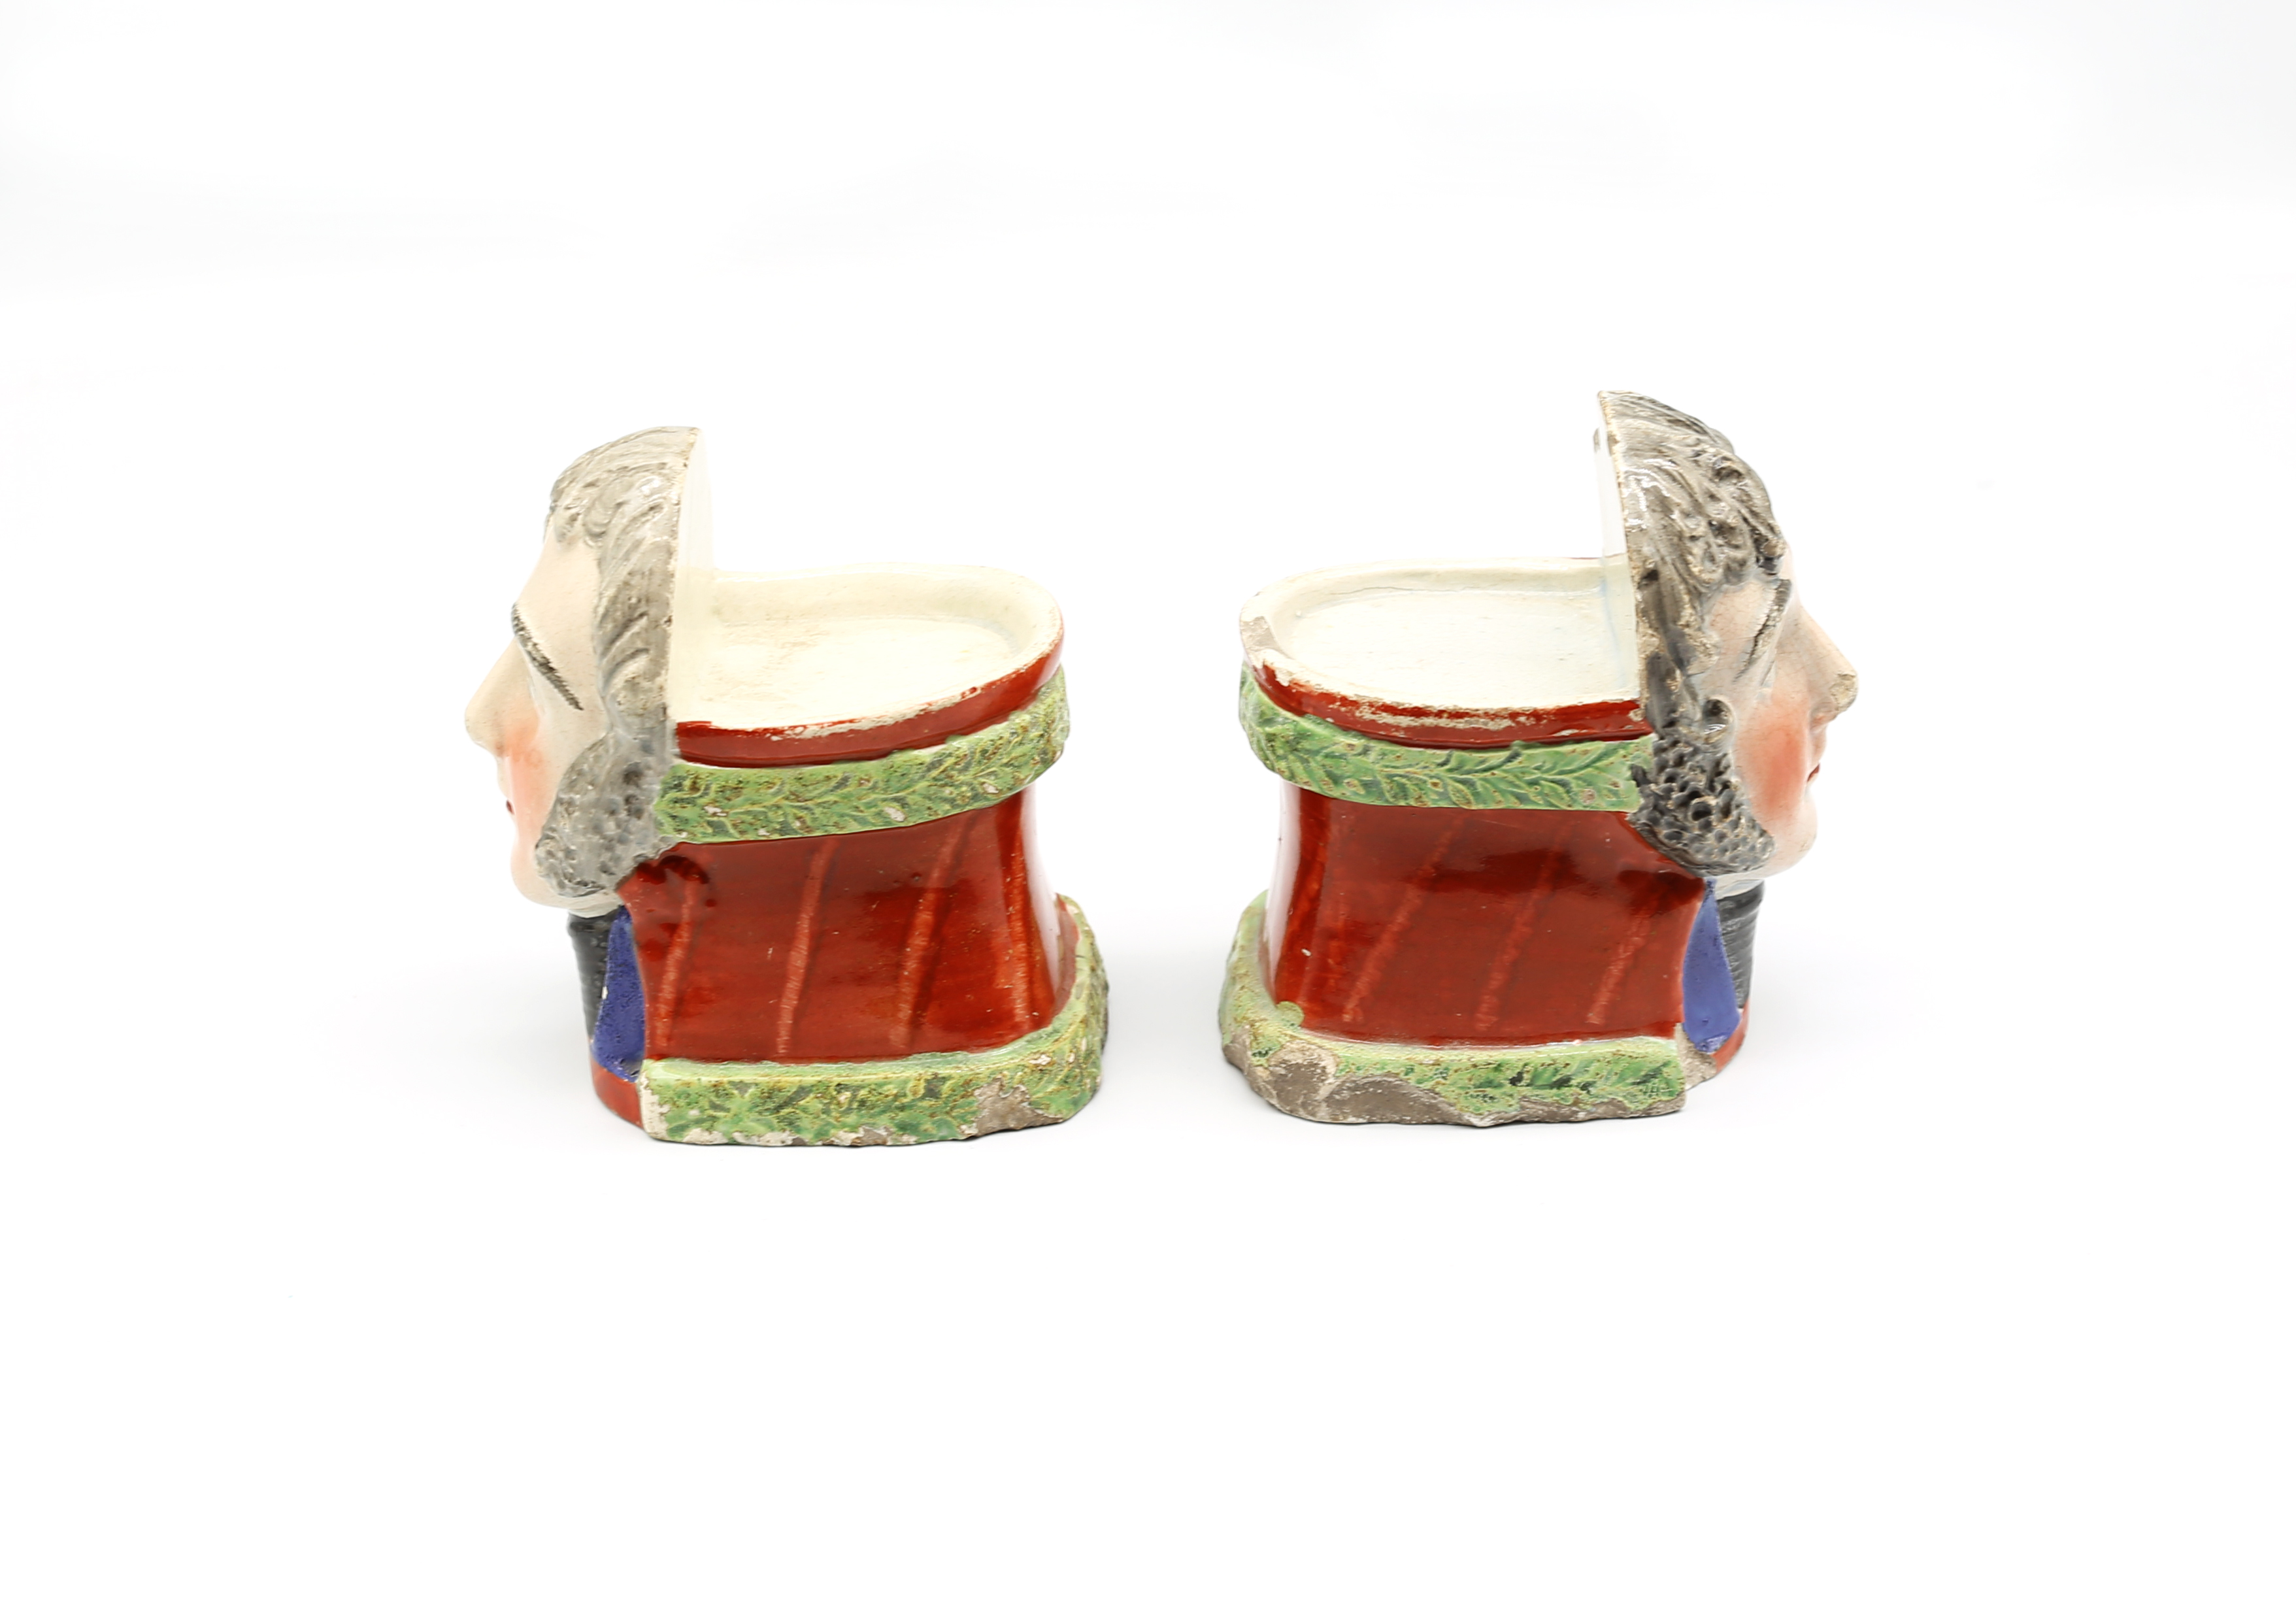 Two Staffordshire pottery furniture rests with the face of The Duke of Wellington  Circa 1820. - Image 2 of 18